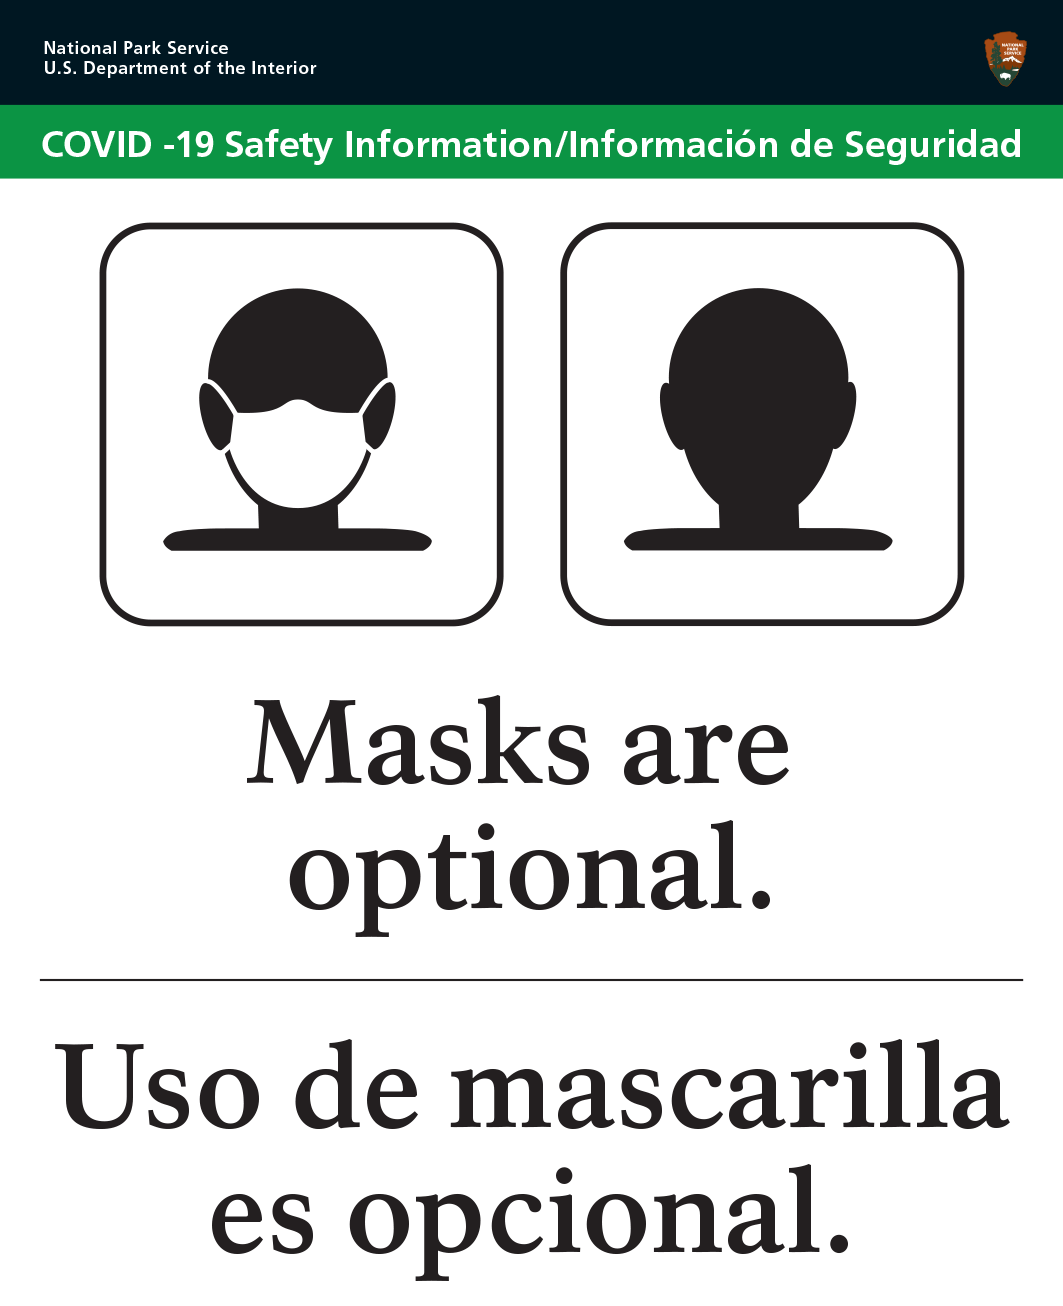 Mask optional text and image of a face